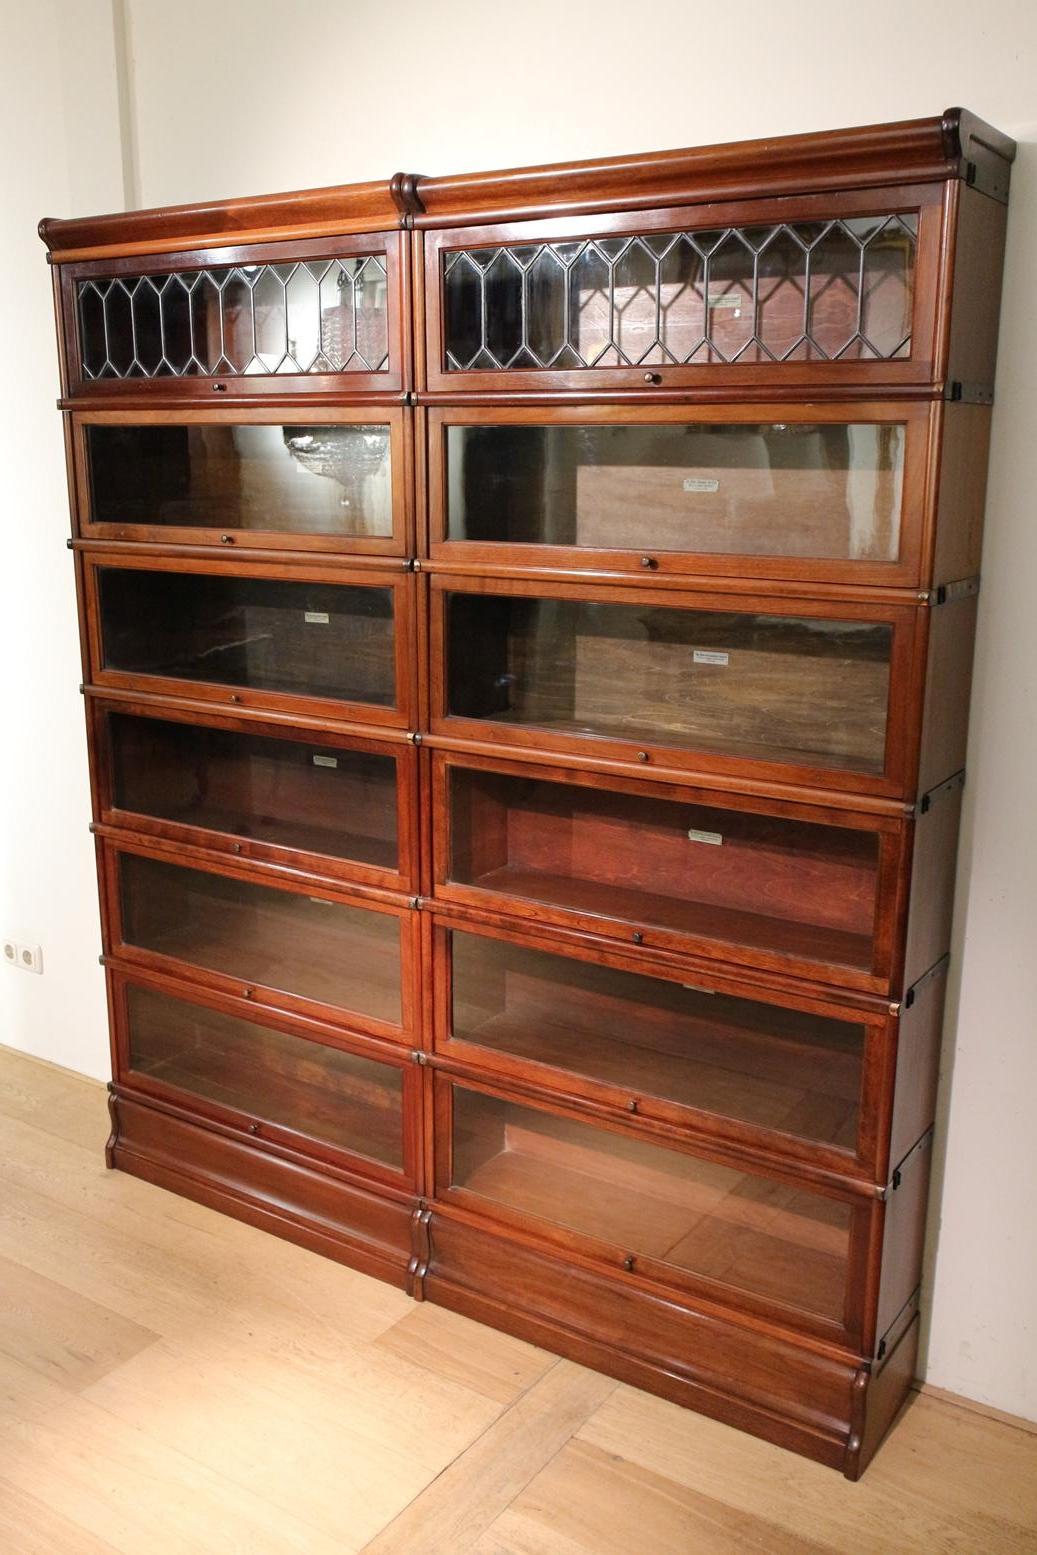 Mahogany Globe Wernicke bookcase in good original condition. With original glass. The top 2 parts have leaded glass in the doors. Br. 172cm, H. 197, D.25cm This cabinet consists of 12 stackable parts. These are stackable bookcases that can be placed